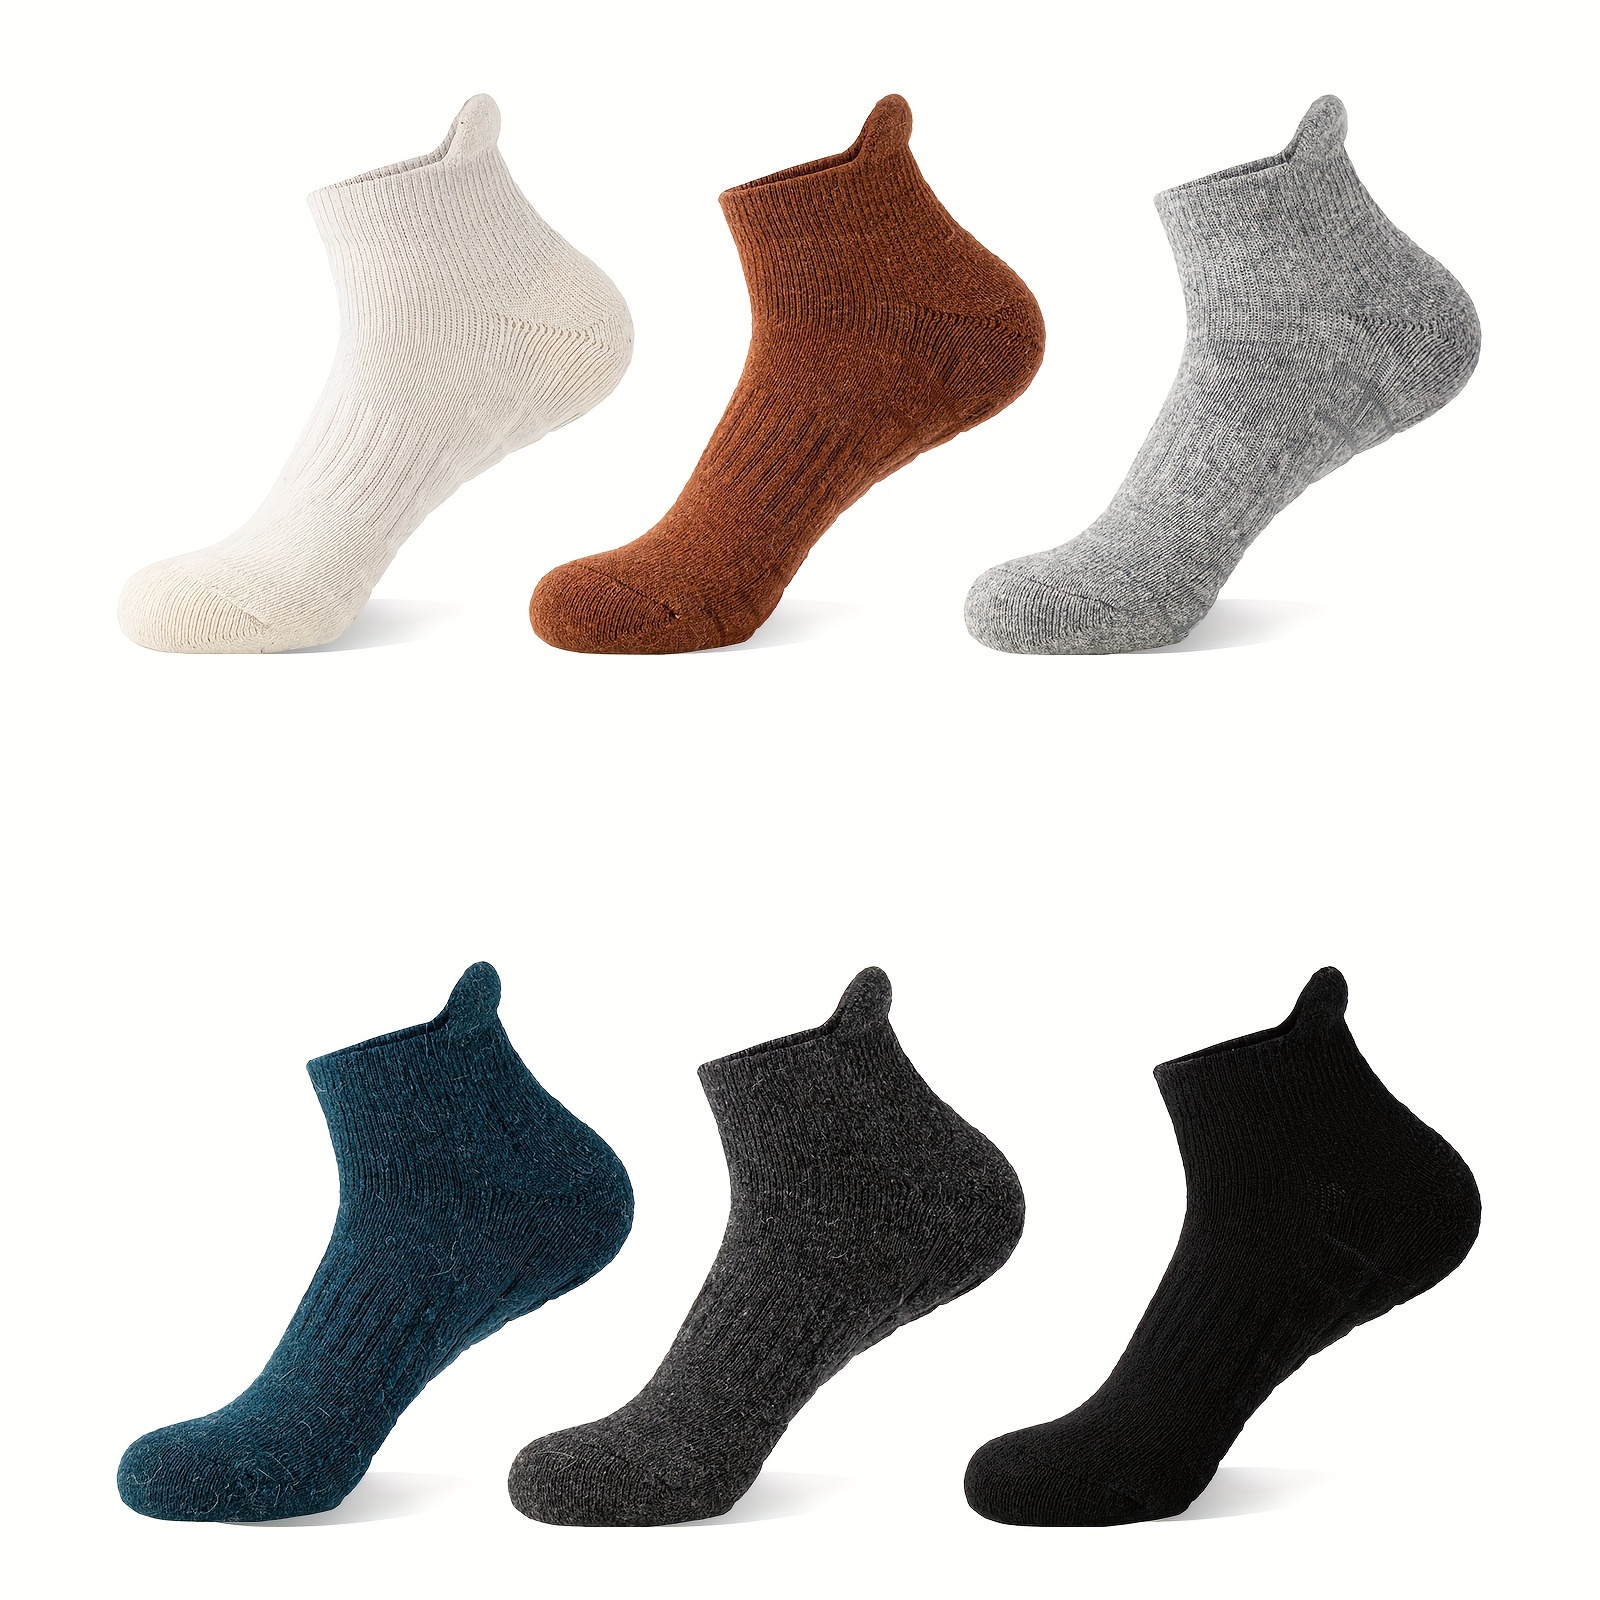 

6 Pairs Merino Wool Ankle Running Hiking Socks Compression Support Thick Cushion No Show Socks For Women Men. Unisex Socks For Men's Outdoor Basketball Training, Running Outdoor Activitie